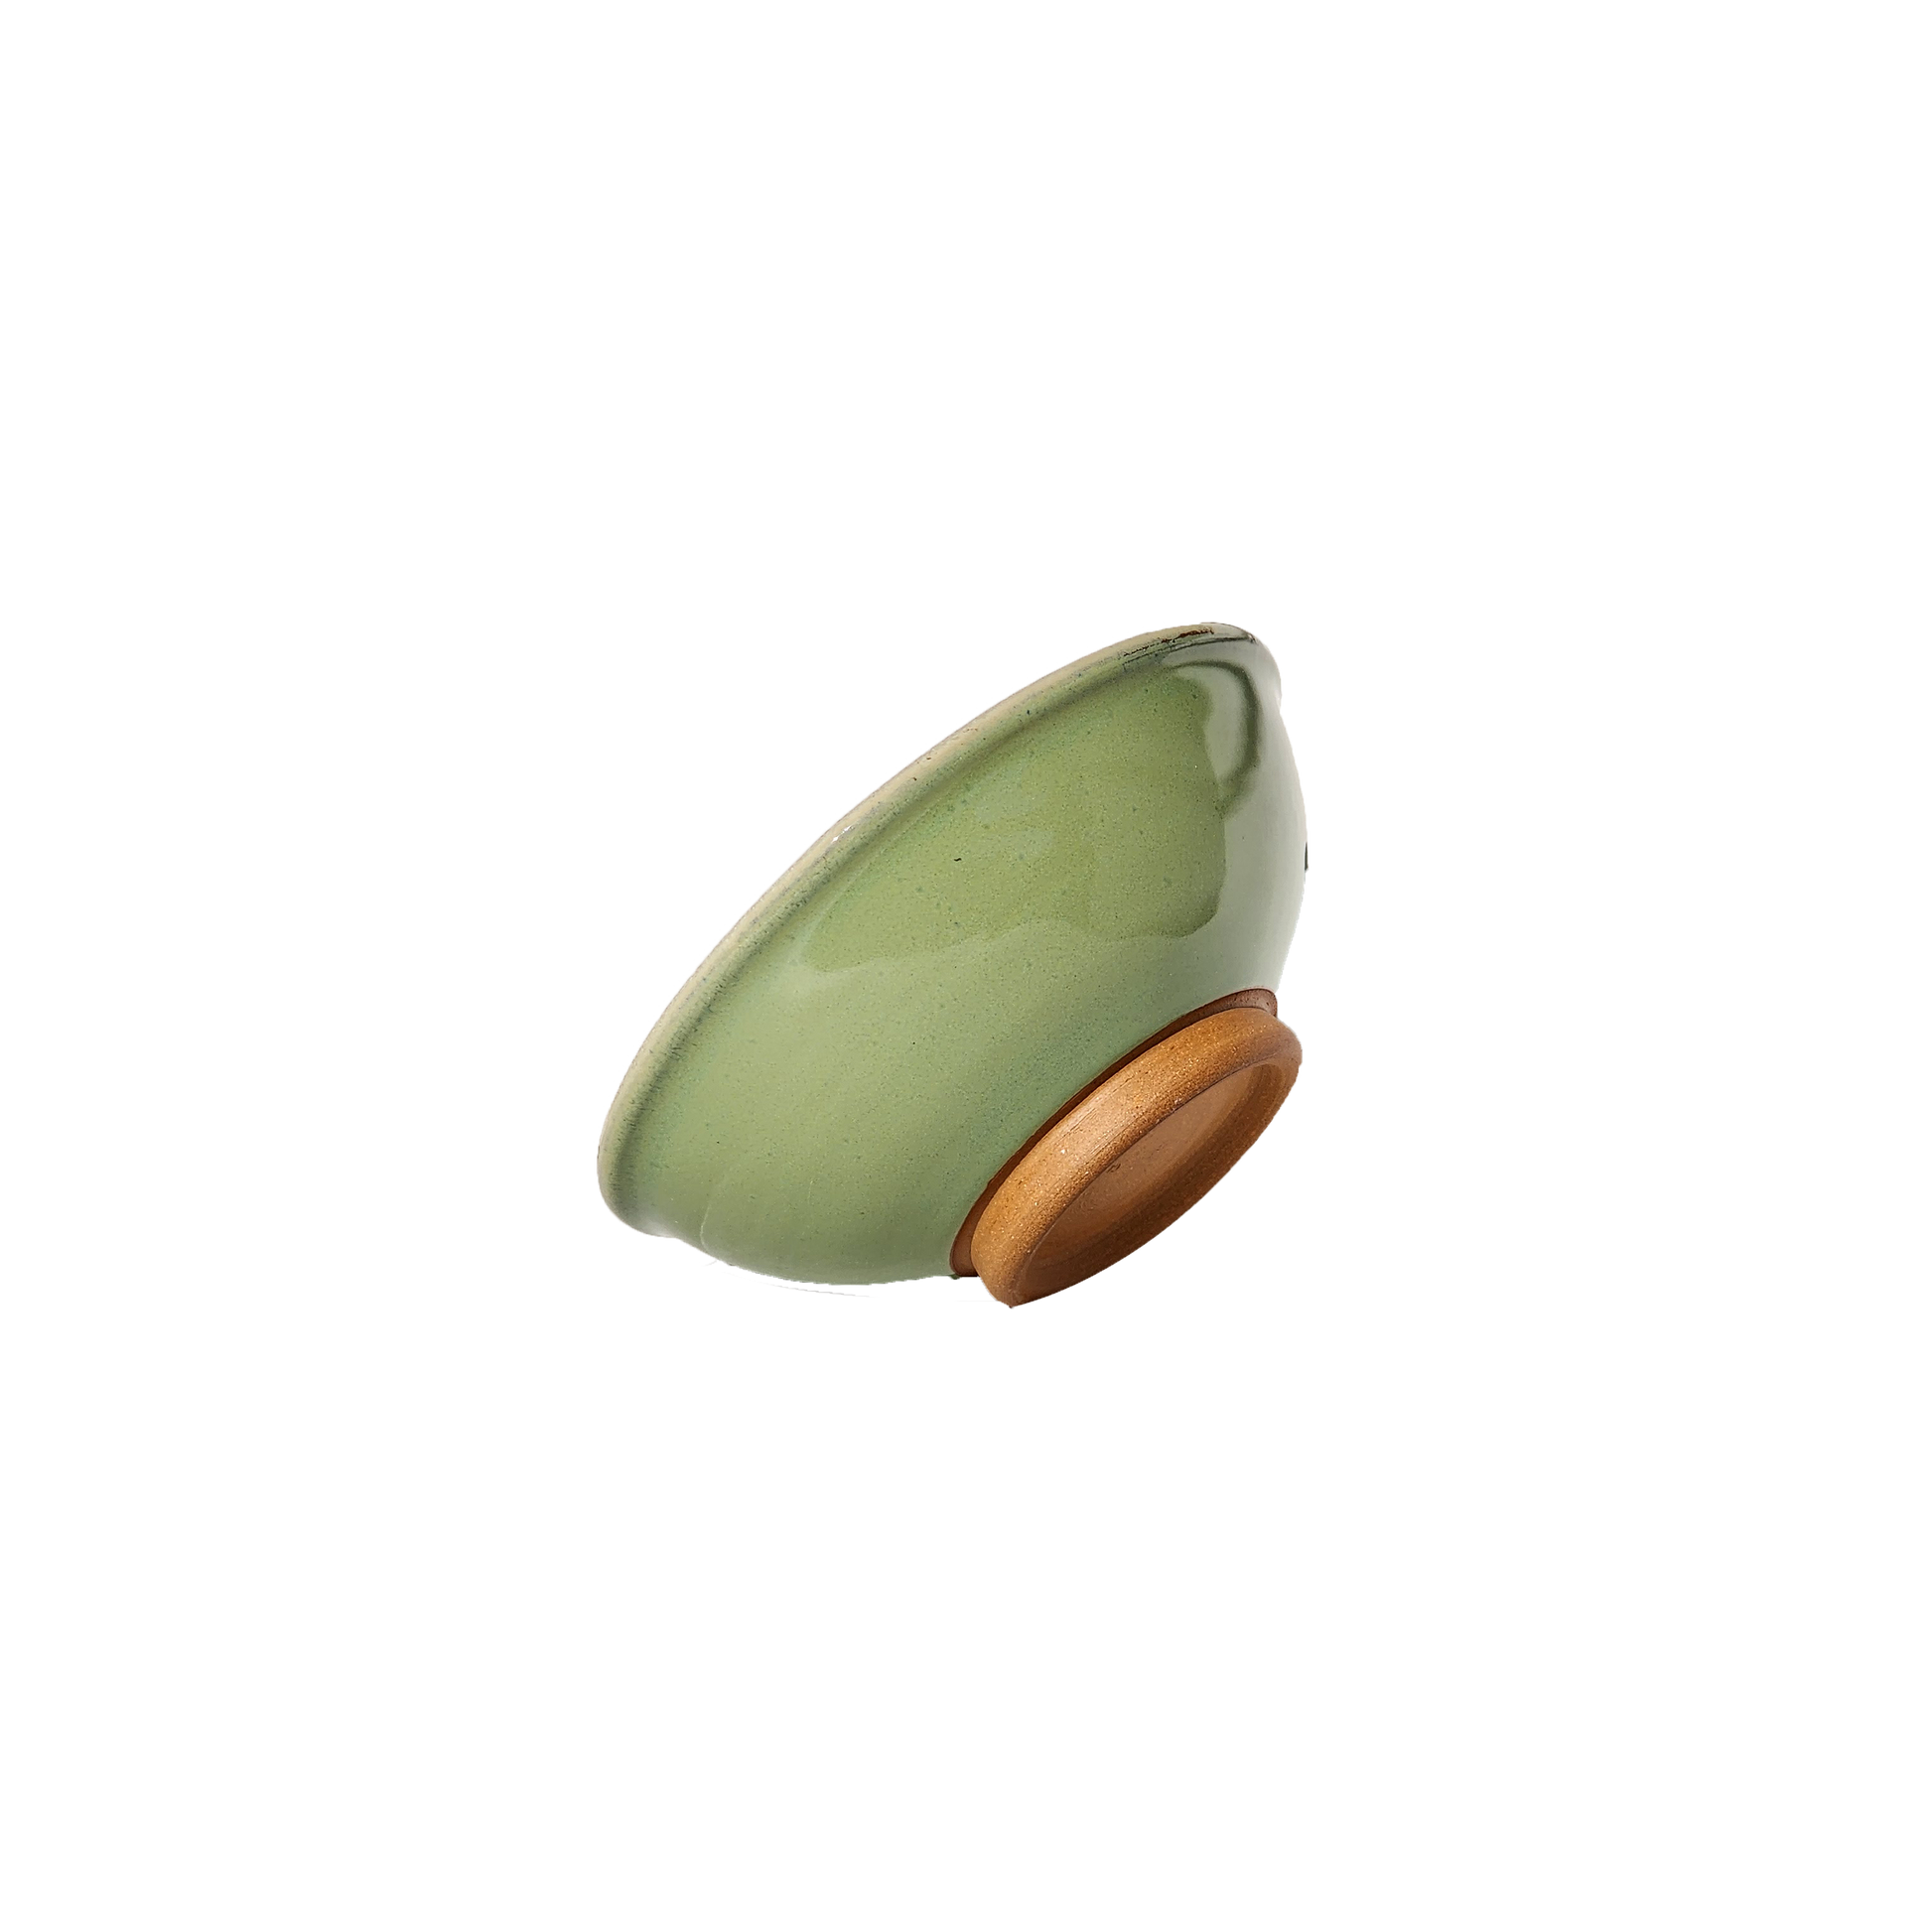 Image: An extra small ceramic bowl in a vibrant bud green color, reminiscent of fresh spring foliage. The bowl features a smooth glaze and rounded edges, offering a pleasing aesthetic and comfortable grip. With a size of 1 cup, it's ideal for holding small servings of food or ingredients